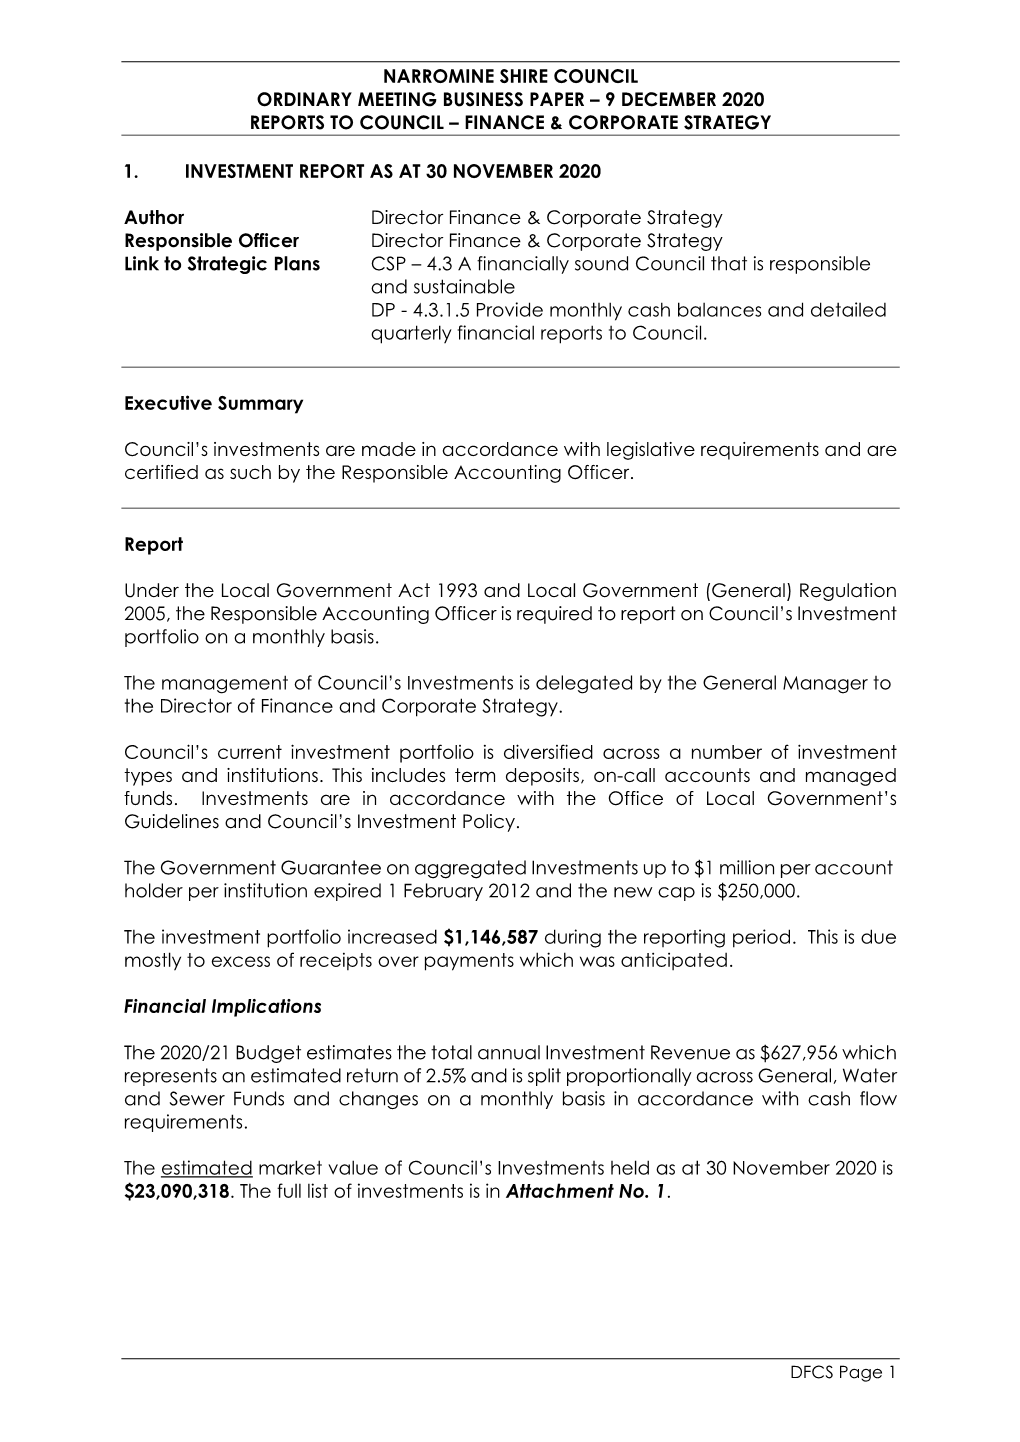 9 December 2020 Reports to Council – Finance & Corporate Strategy